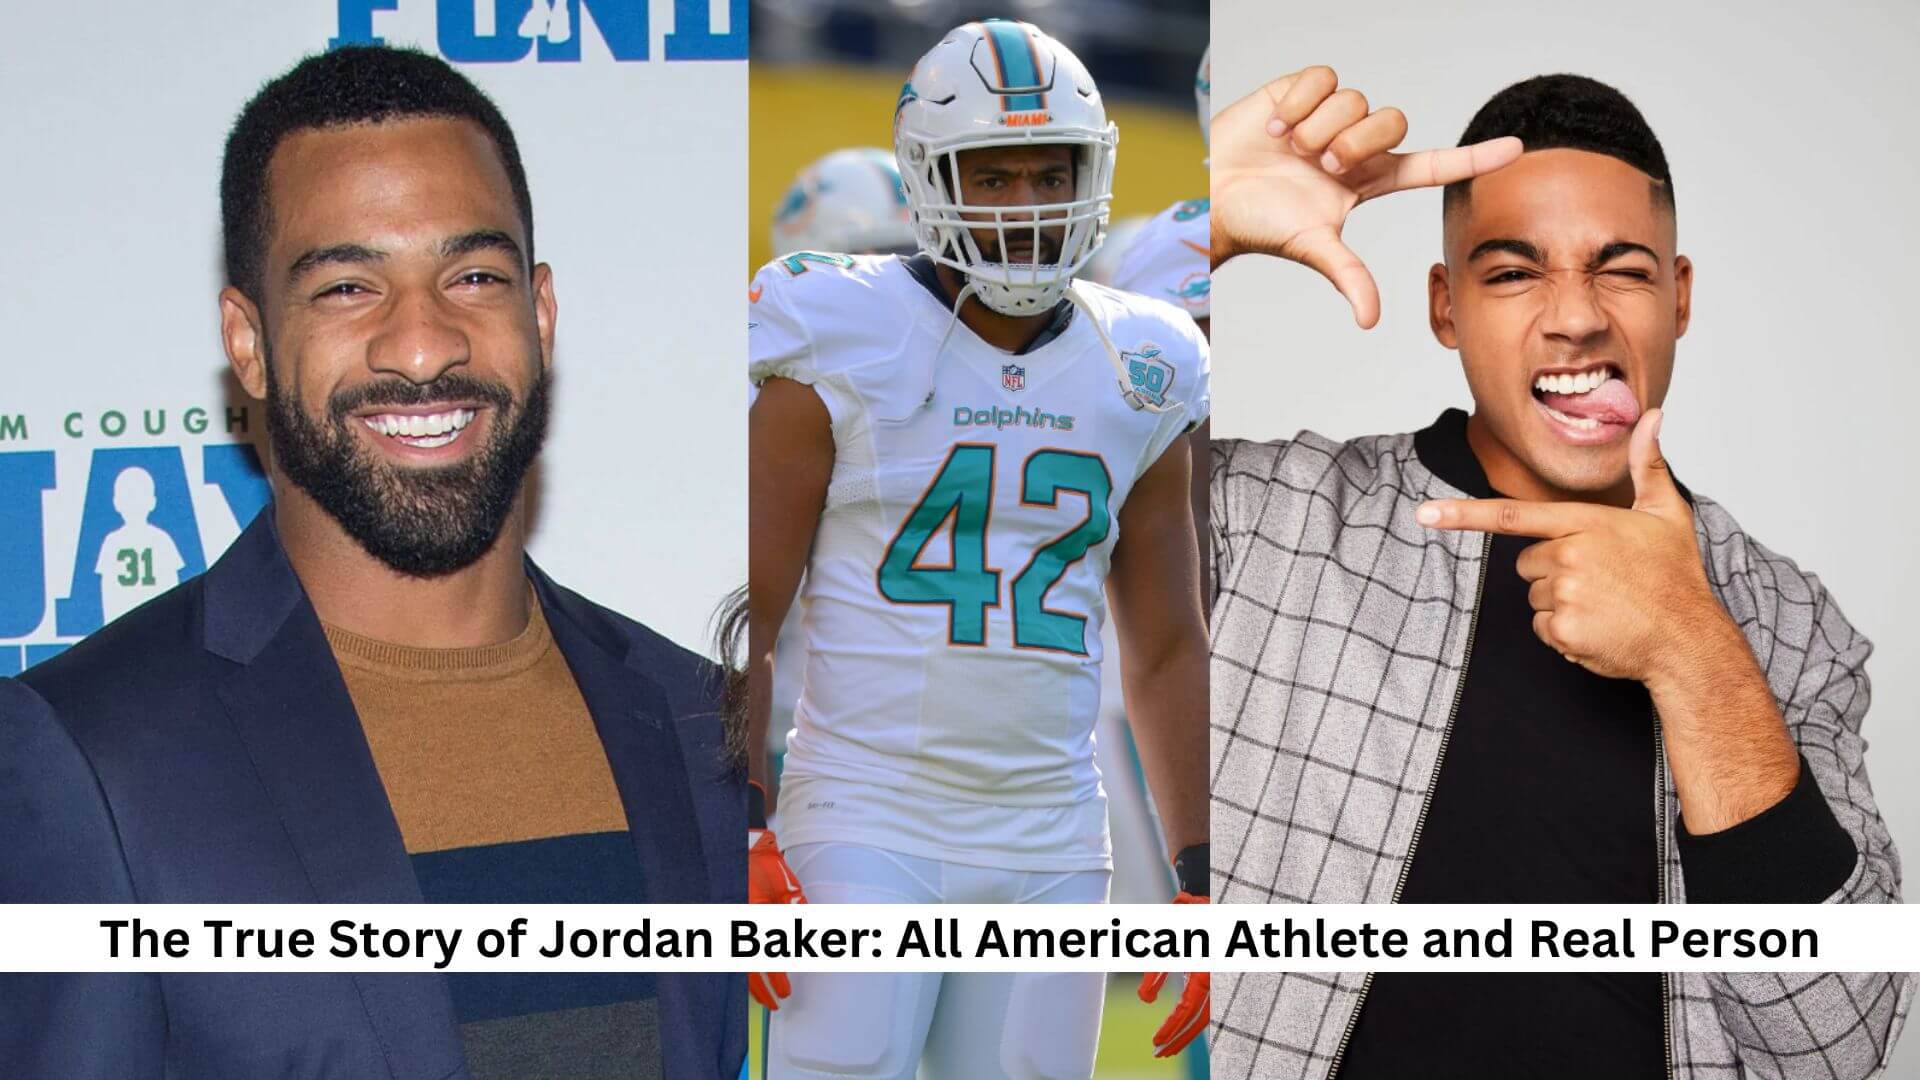 The True Story of Jordan Baker: All American Athlete and Real Person